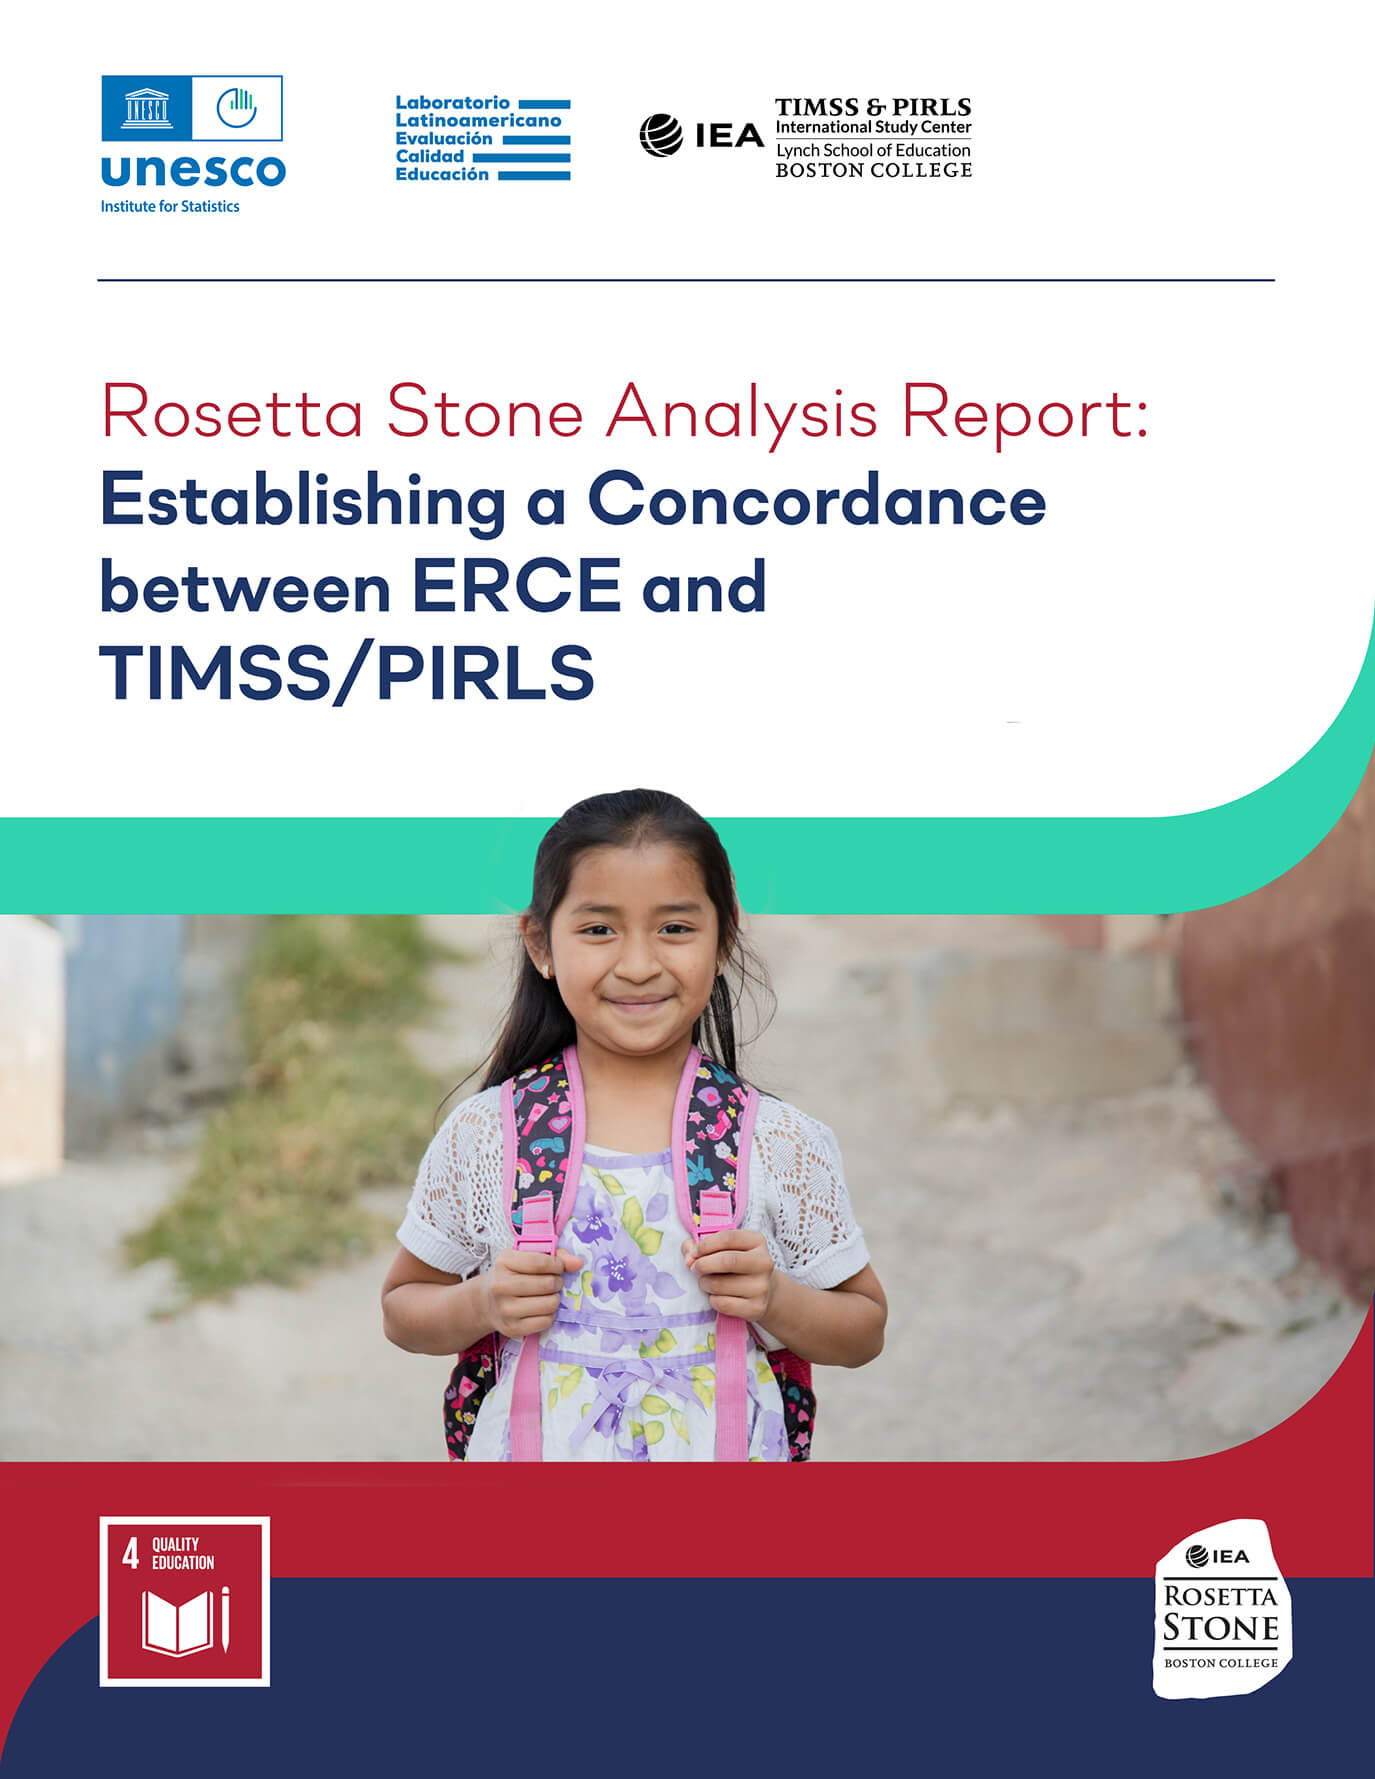 Cover art for the Rosetta Stone ERCE Analysis Report: Establishing a Concordance between ERCE and TIMSS/PIRLS; featuring logotypes of IEA, Boston College Lynch School of Education, UNESCO, and Latin American Laboratory for Evaluation of the Quality of Education (LLECE).